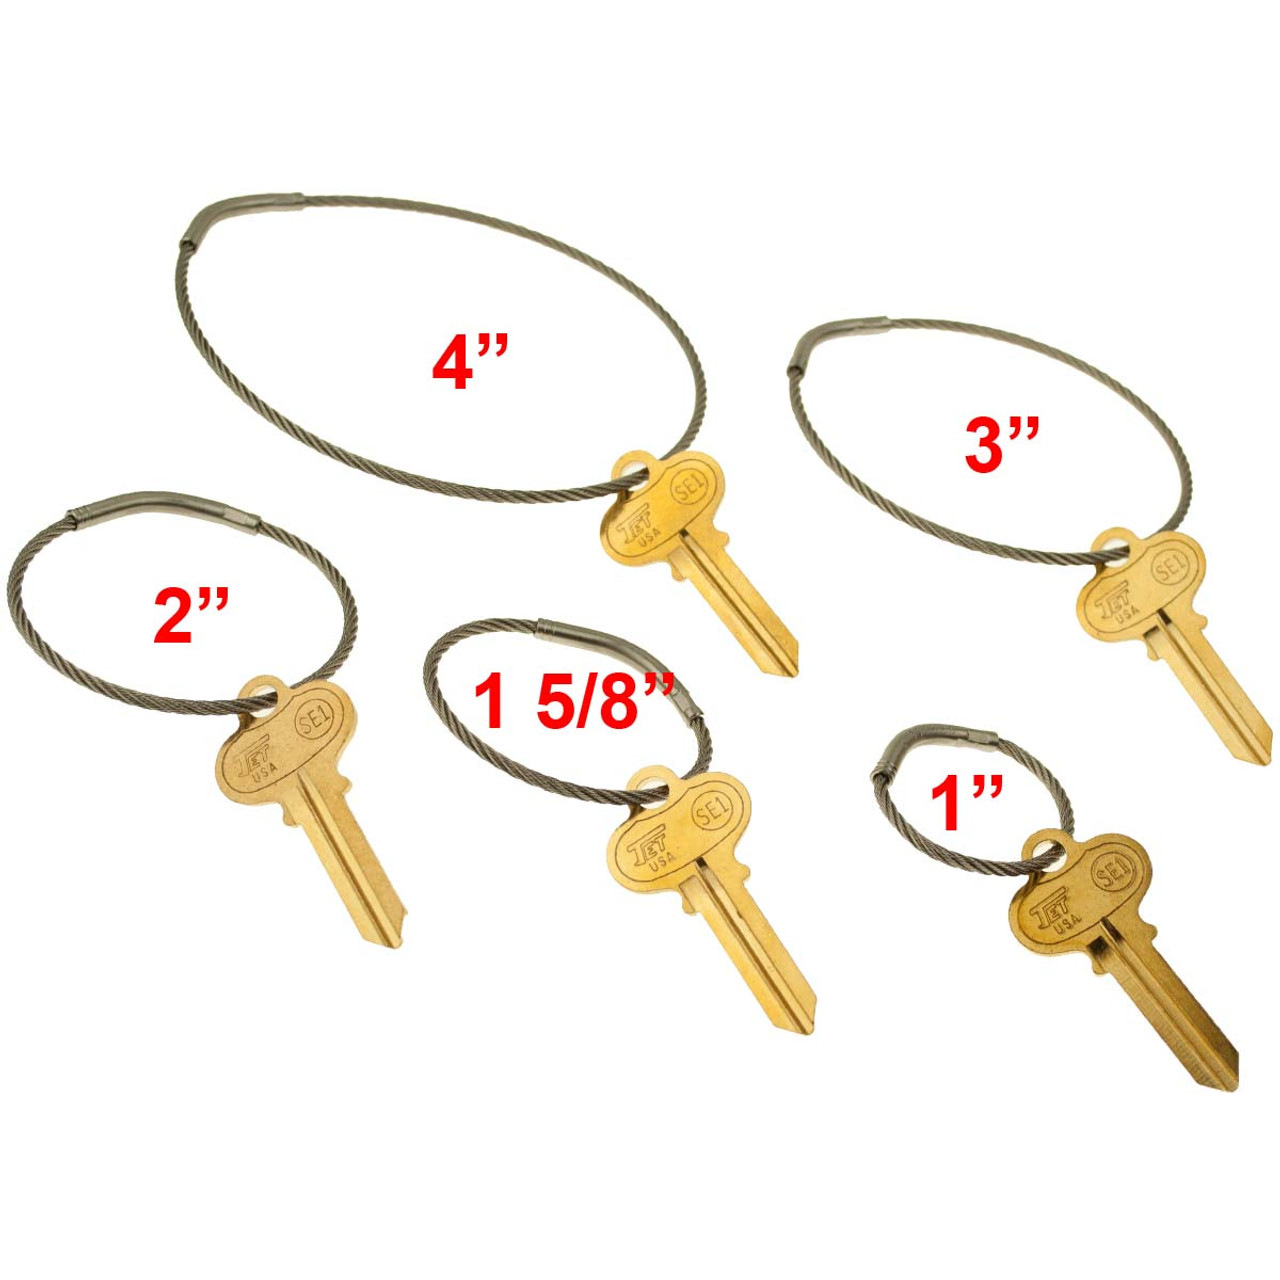 Shop for and Buy Flexible Stainless Steel Cable Tamper Proof Key